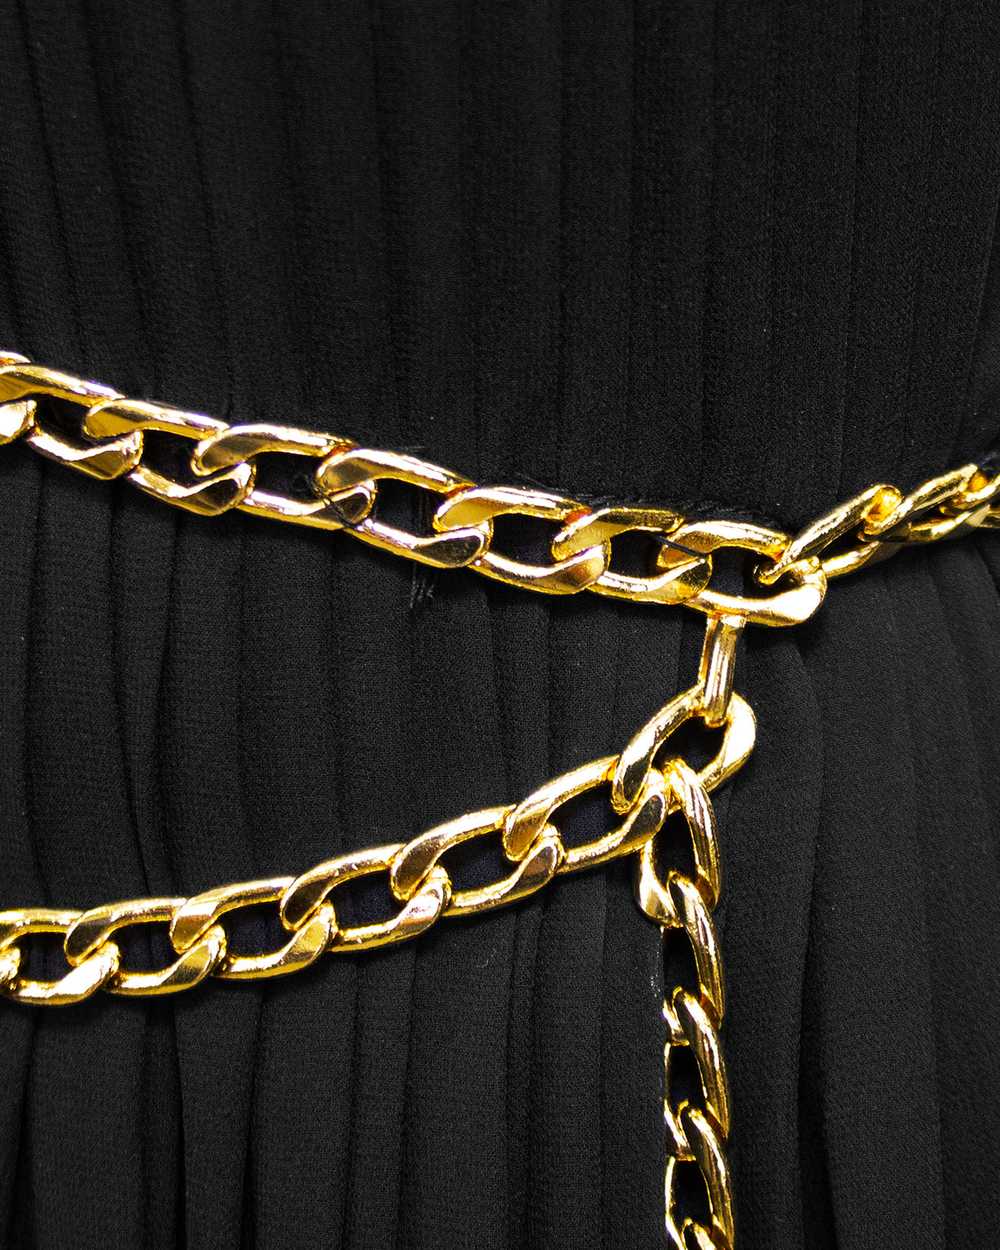 Chanel Black Chiffon Gown with Gold Chain Belt - image 7